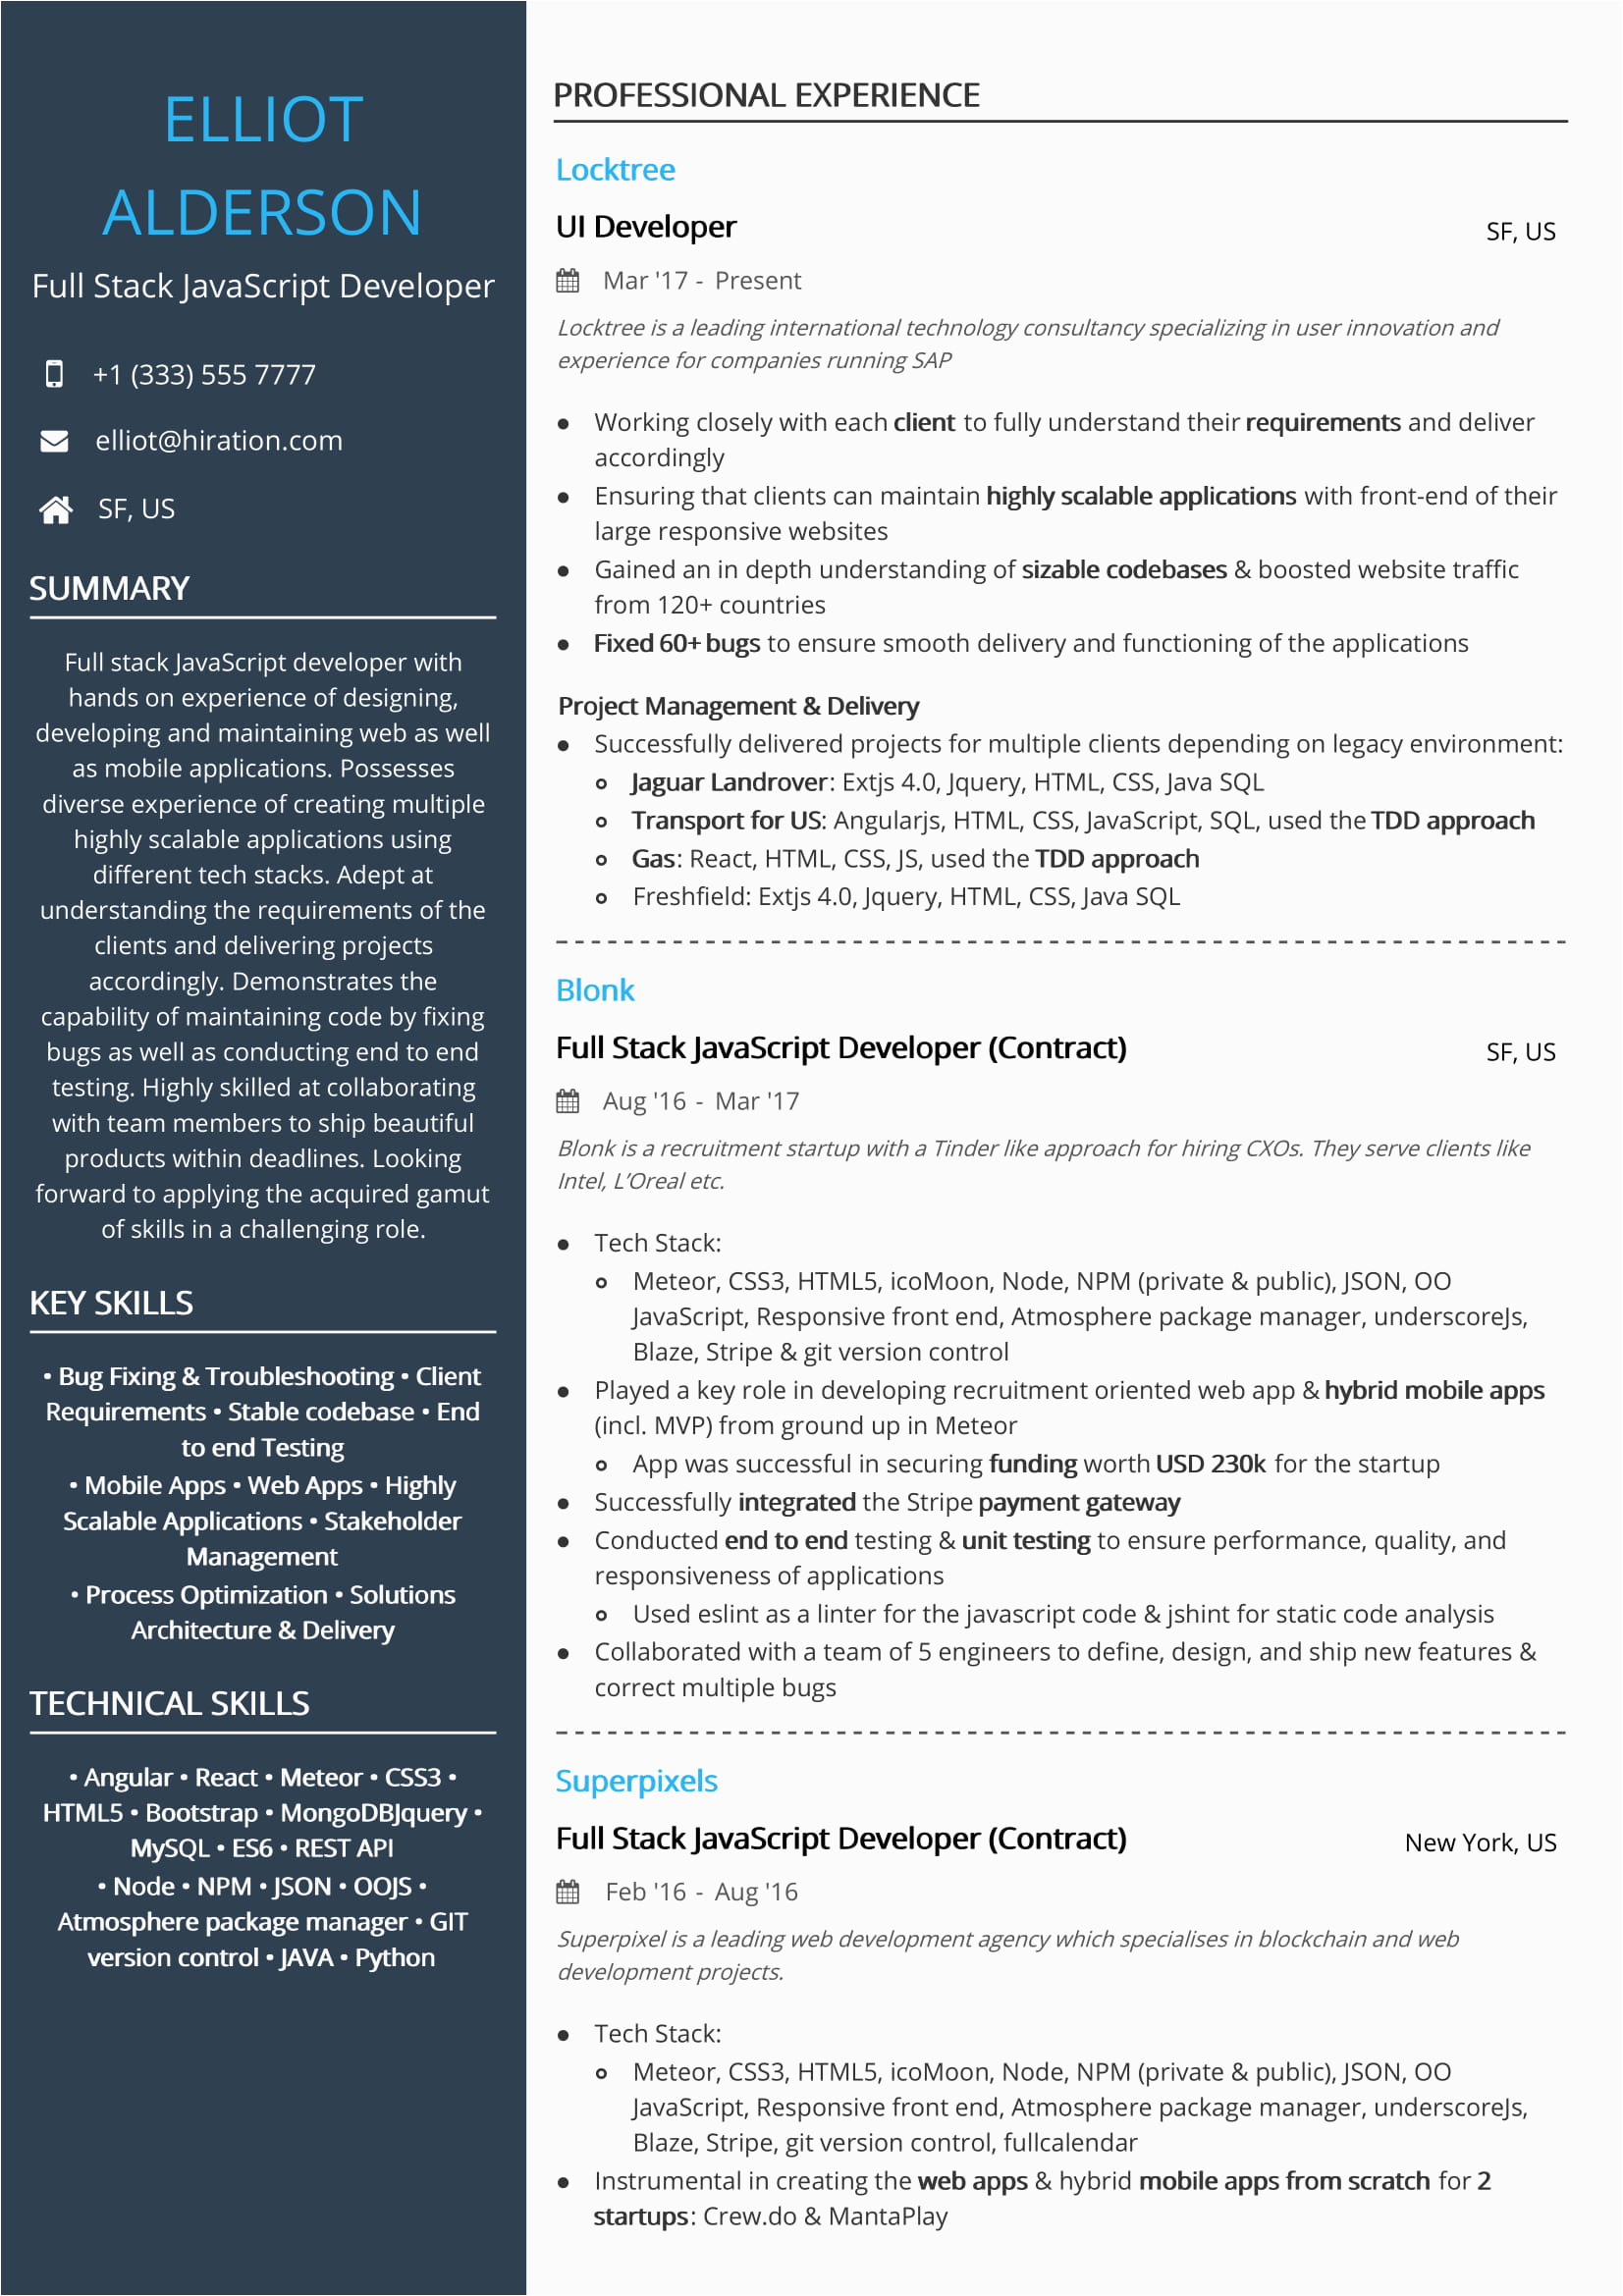 Coursera Ui Full Stack Experience On the Sample Resume Technology Resume Examples & Resume Samples [2020]